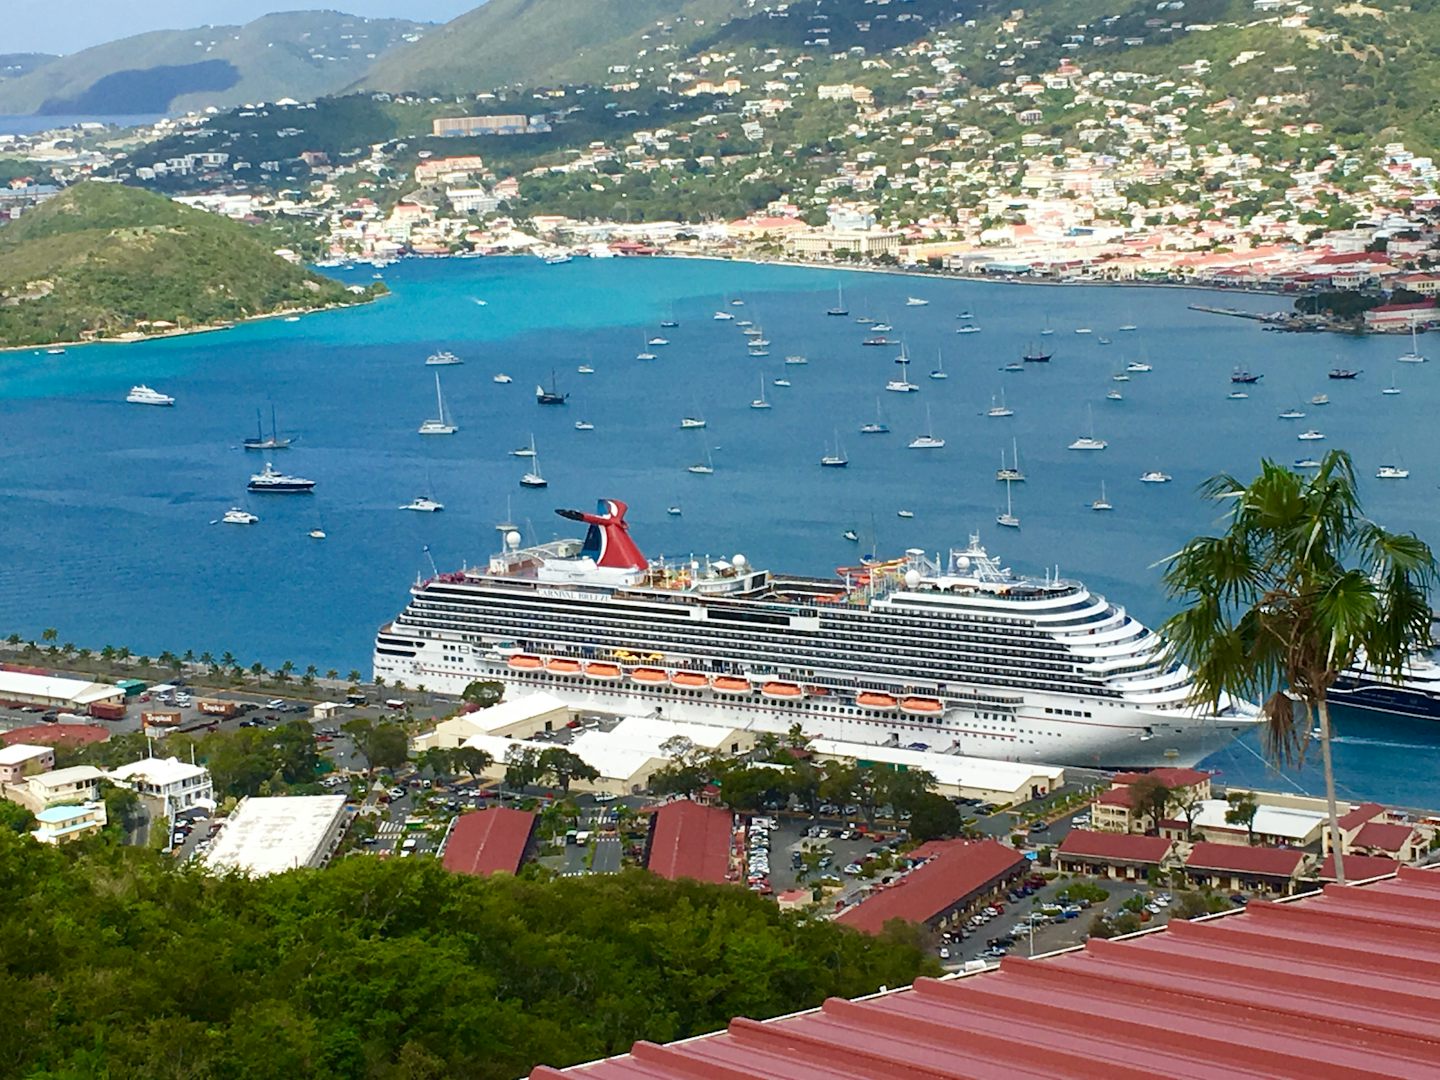 View from cable ride in St. Thomas